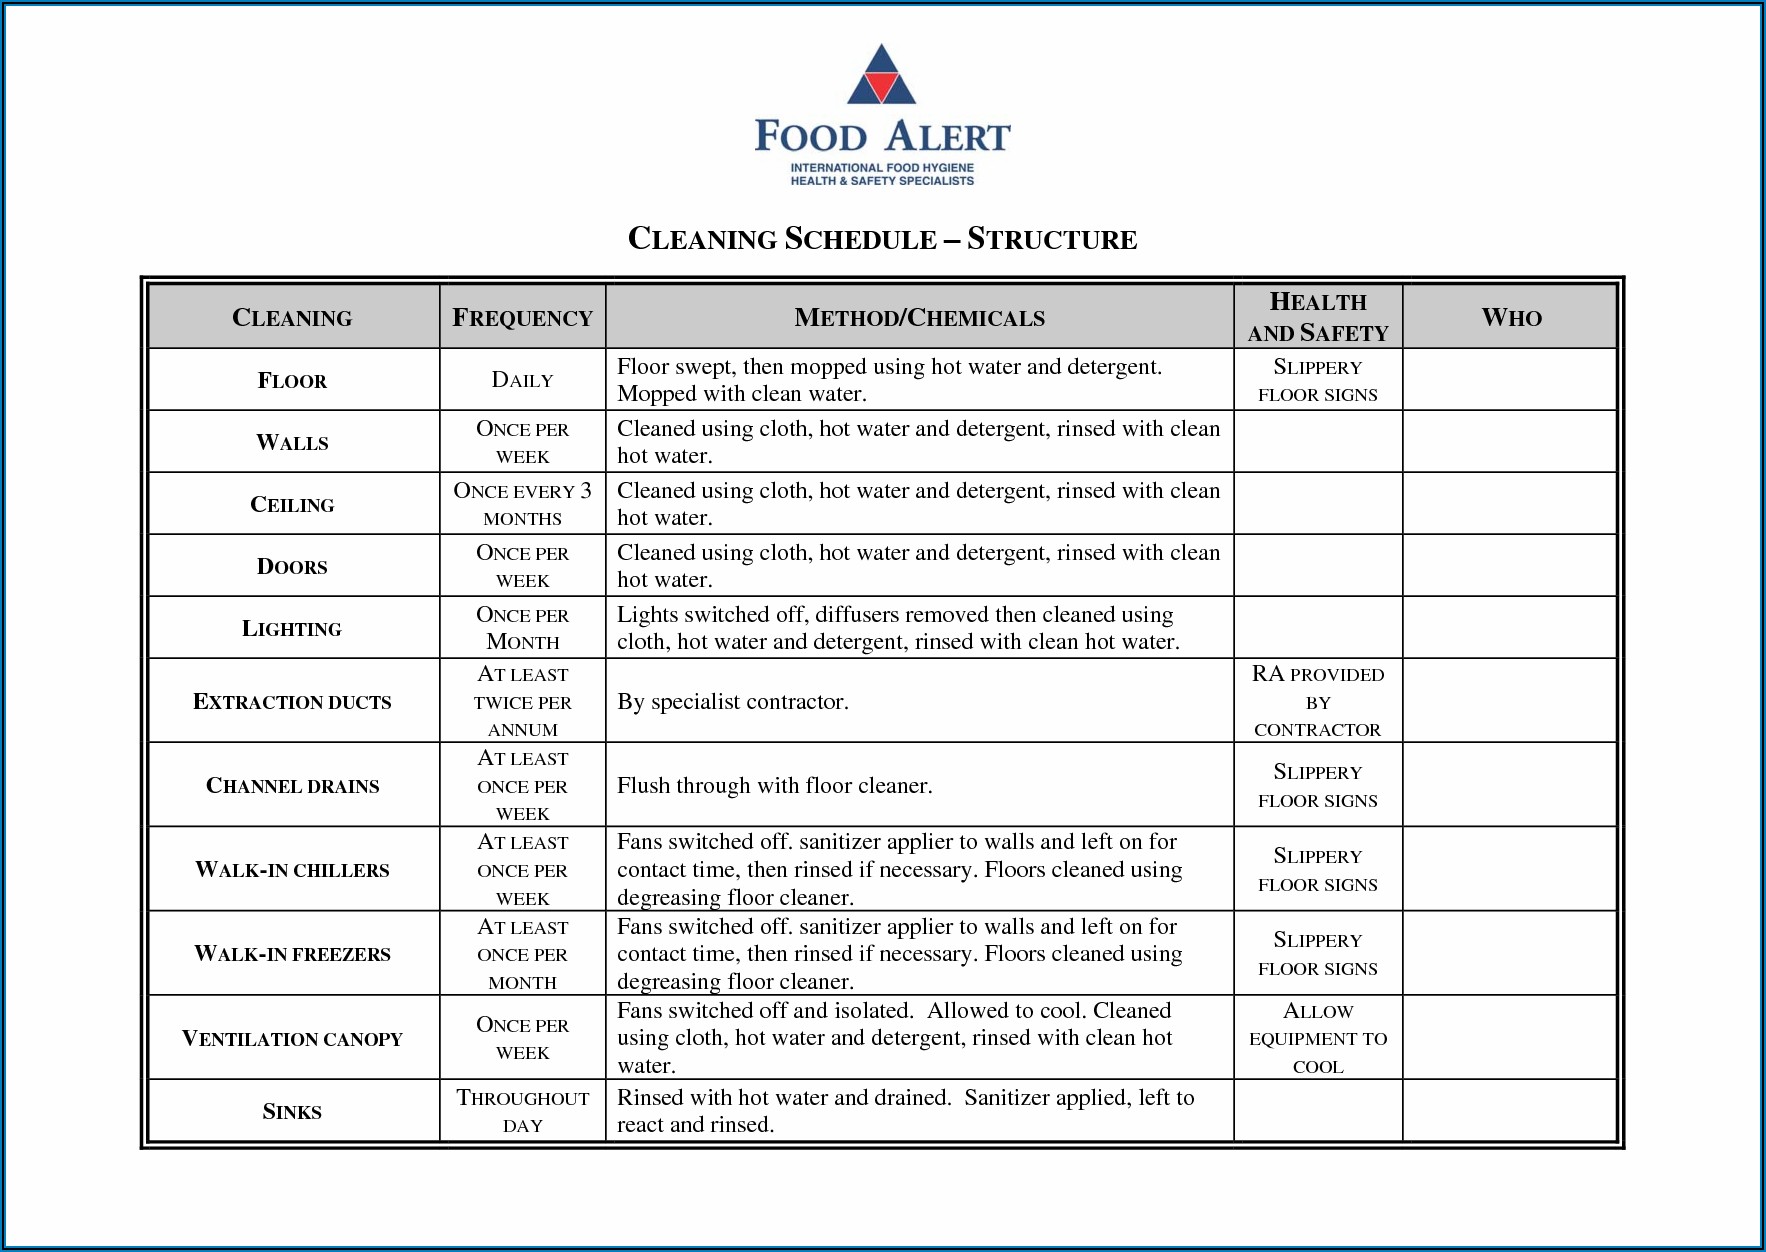 Commercial Kitchen Cleaning Schedule Template